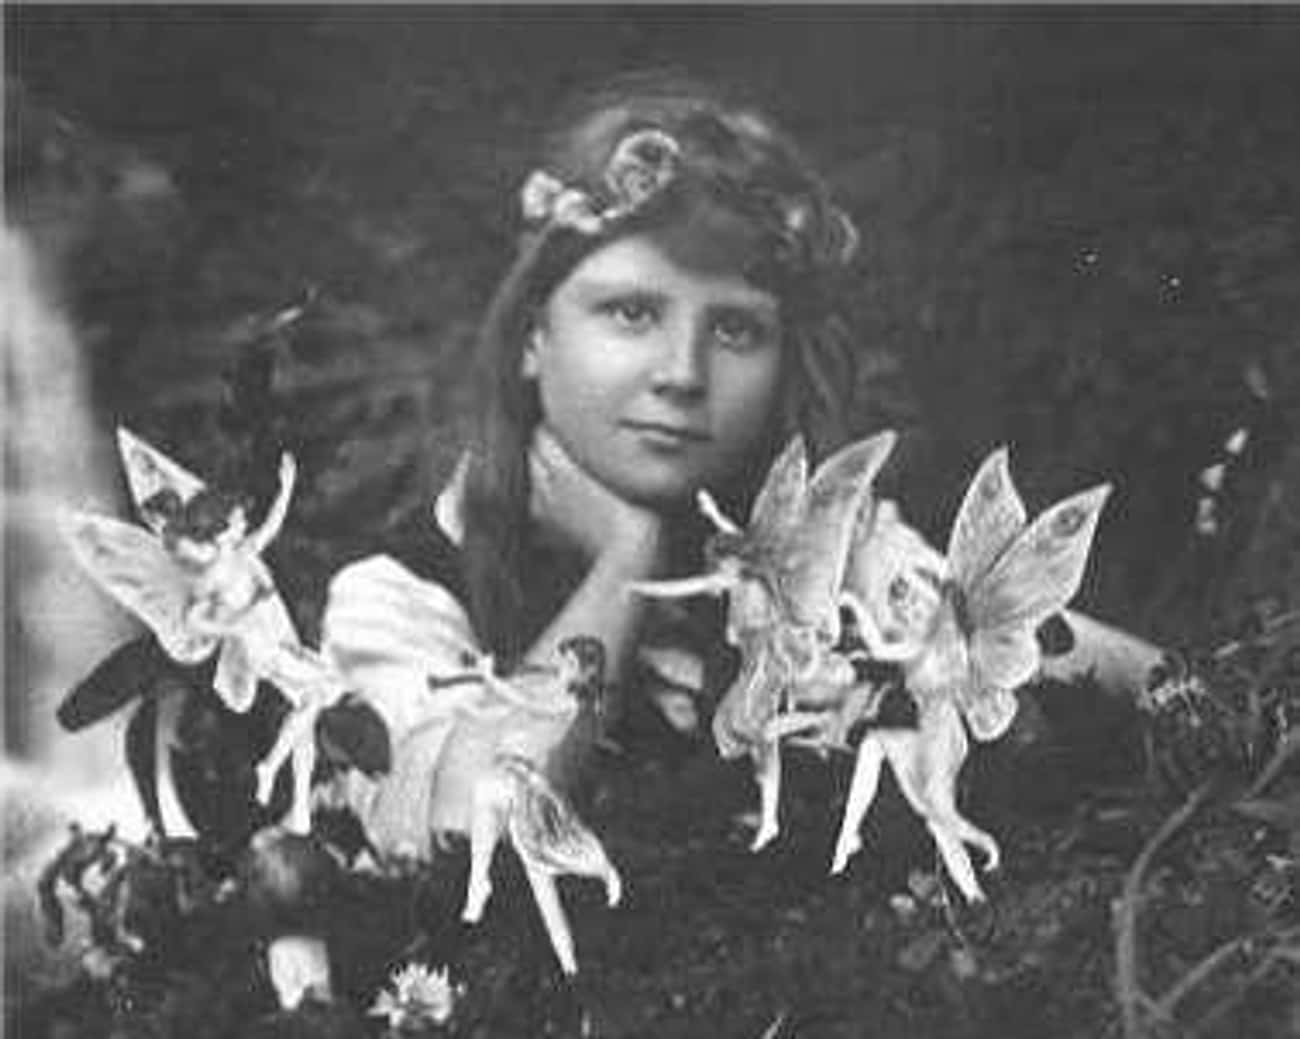 Two Little Girls Drew the Cottingley Fairies So They Wouldn't Get Punished